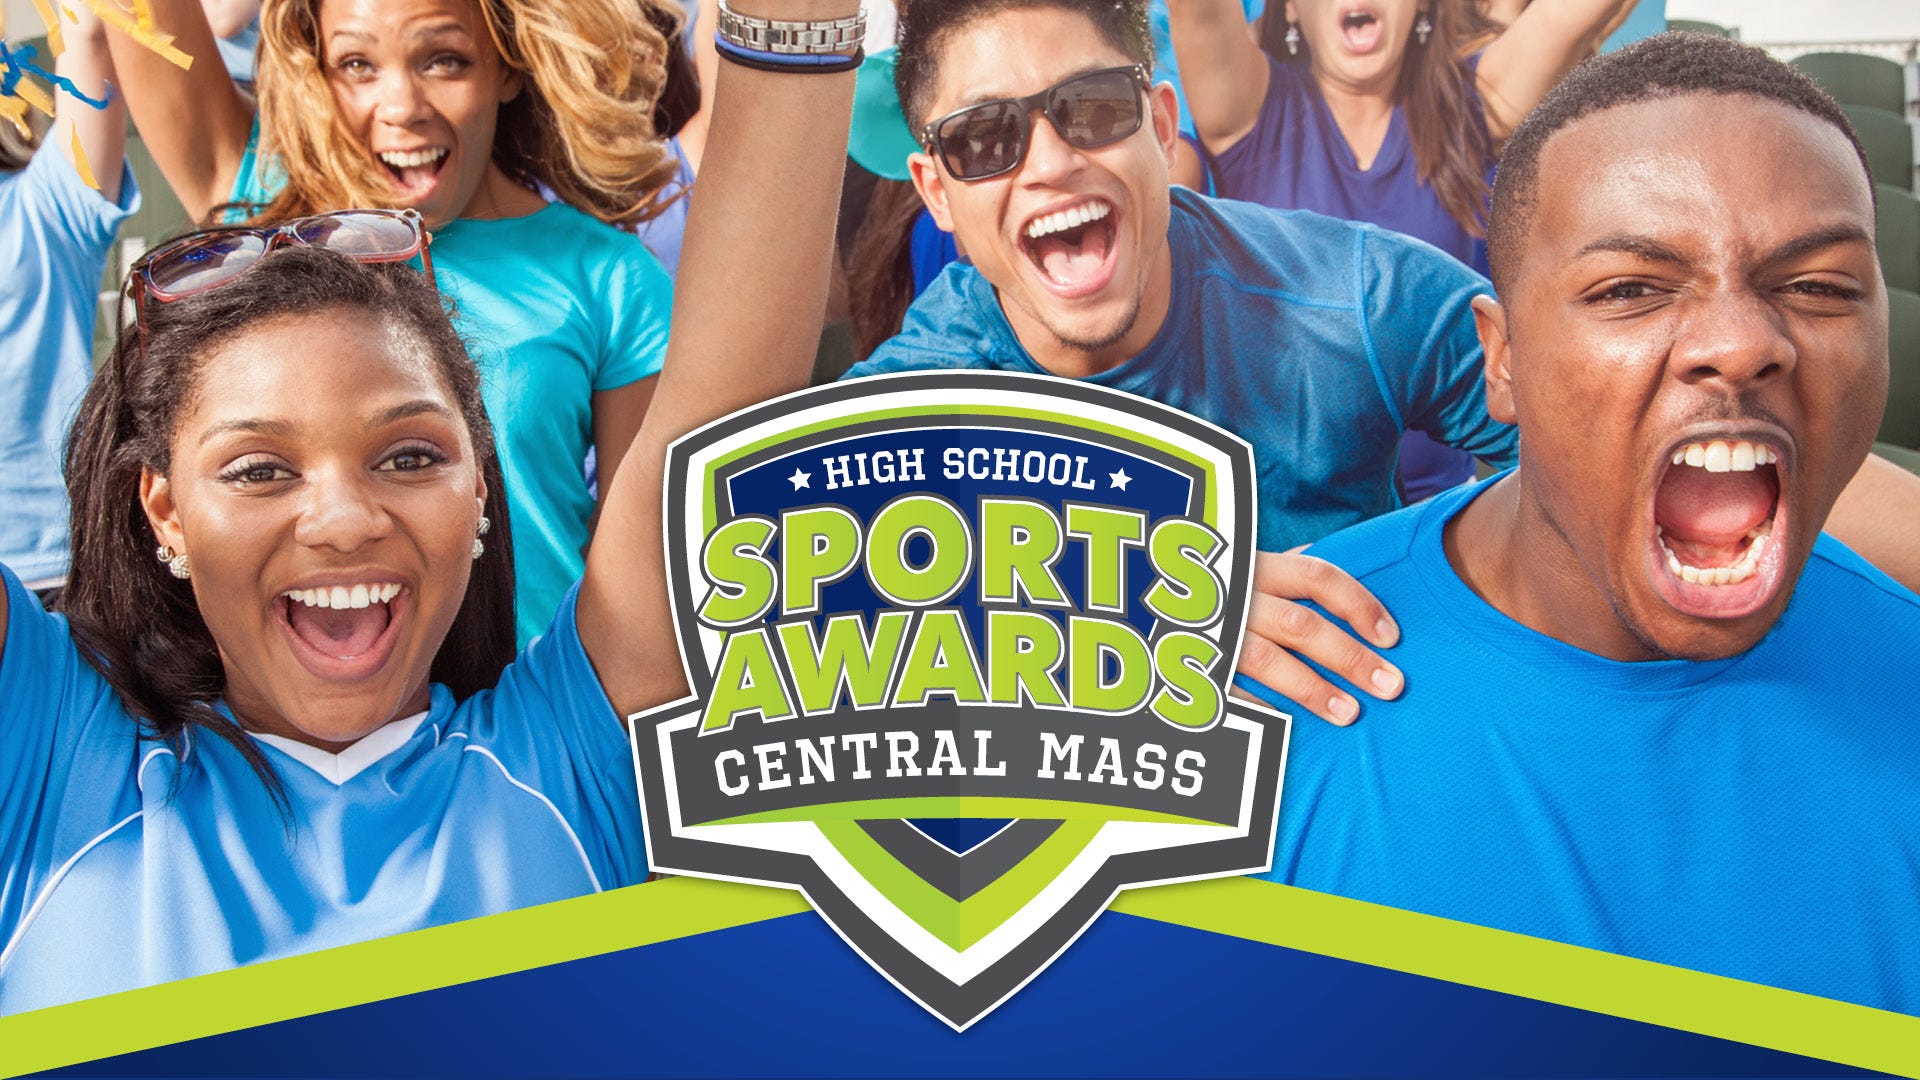 Cast Your Vote for the Spirit Award at the Central Mass High School Sports Awards